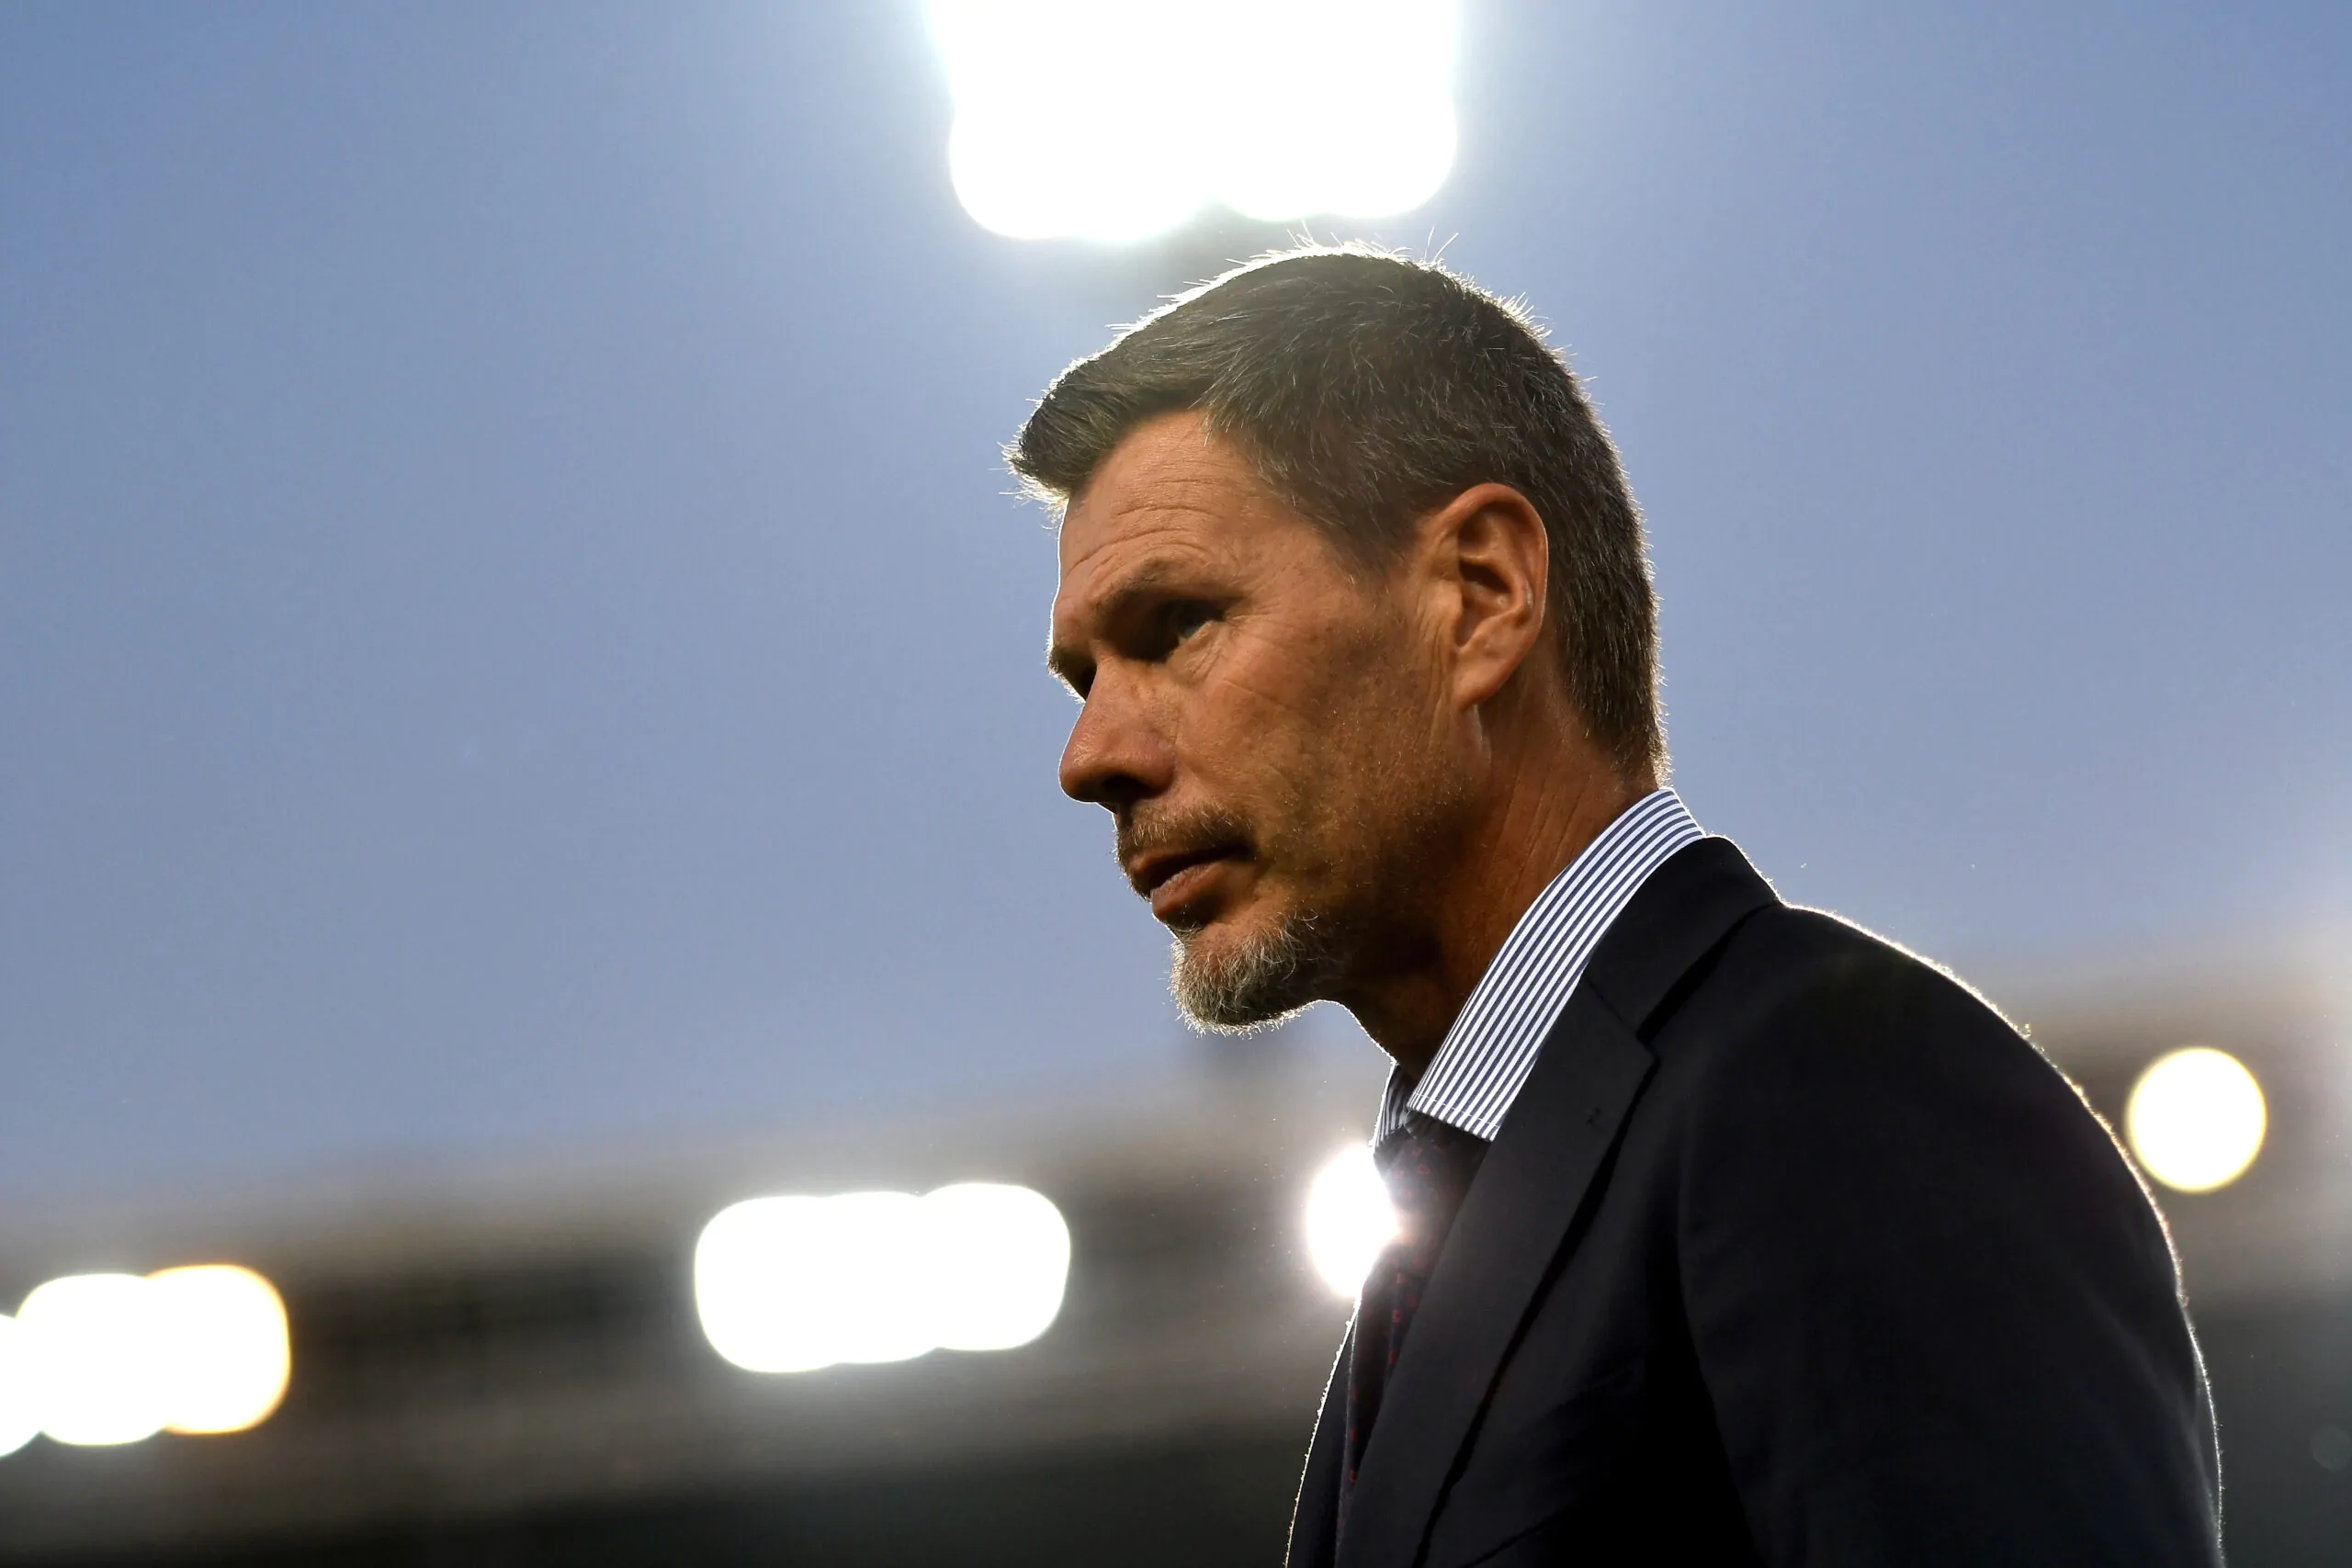 Former Milan mainstay Zvonimir Boban, who currently works as UEFA’s Chief of Football, has offered Mourinho a piece of tactical advice for his Roma team.